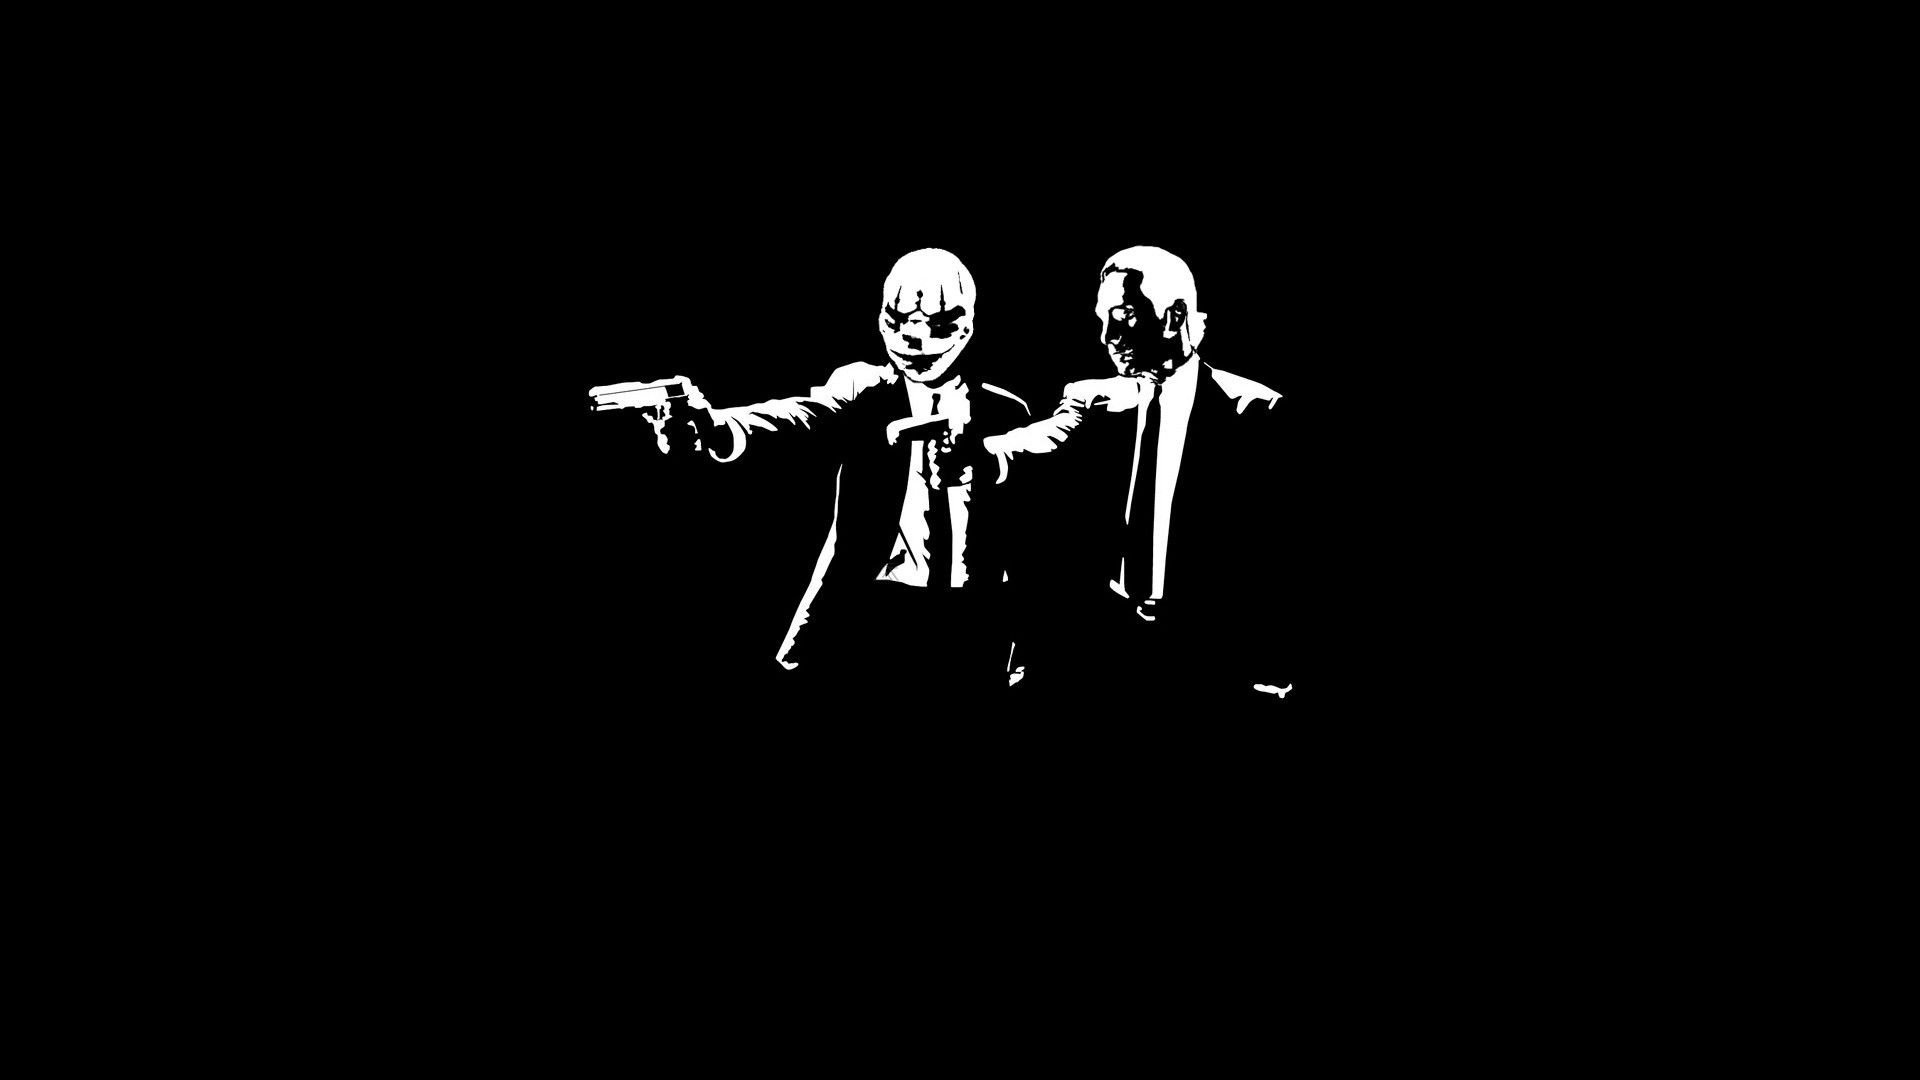 General 1920x1080 minimalism movies monochrome Payday: The Heist video games crime gangster black background simple background gun weapon